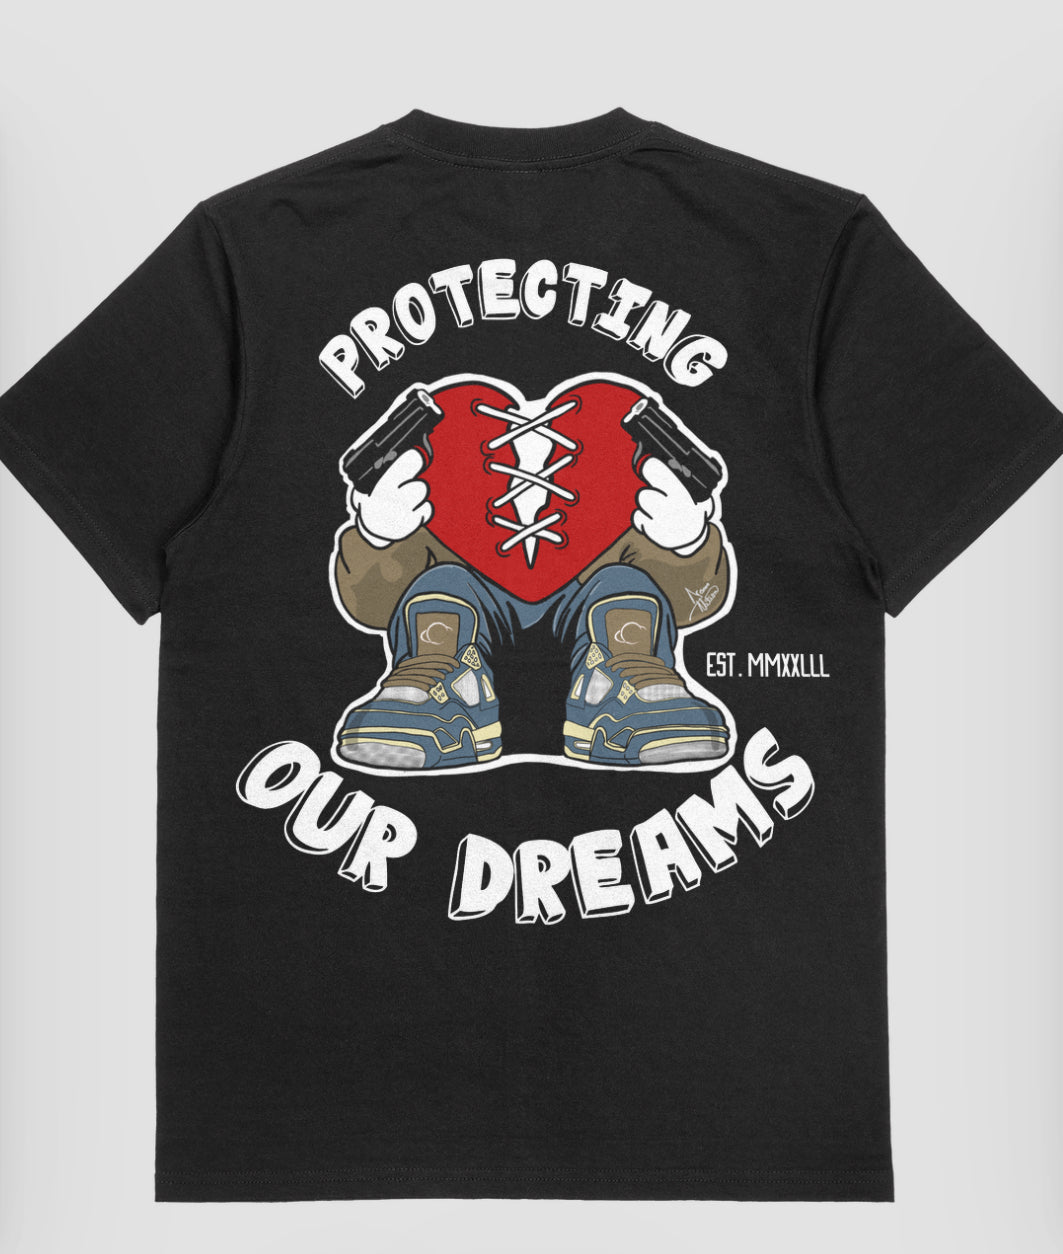 Protecting our dreams (black)